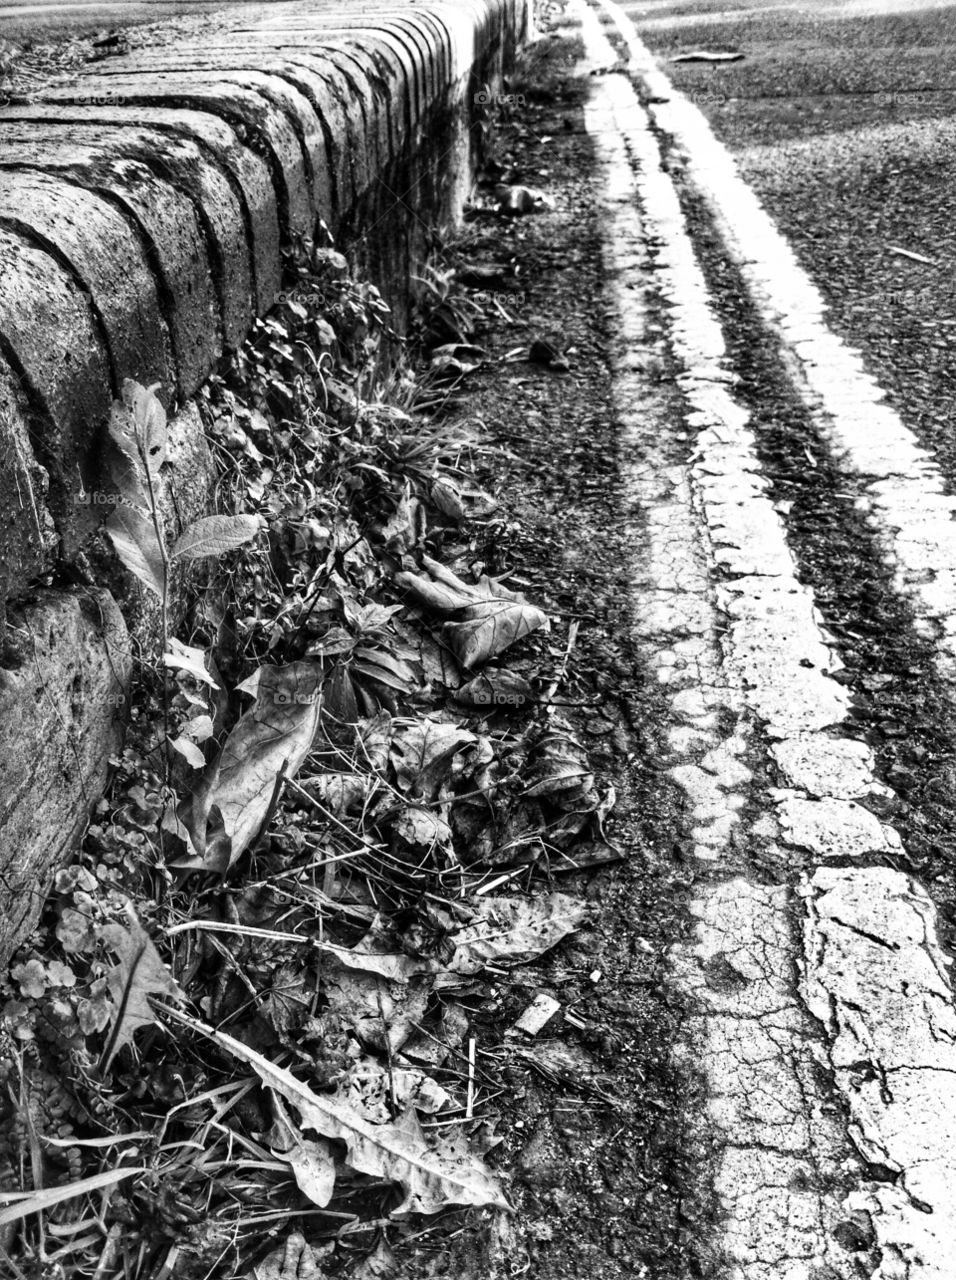 Close up of the side of the road in black and white.